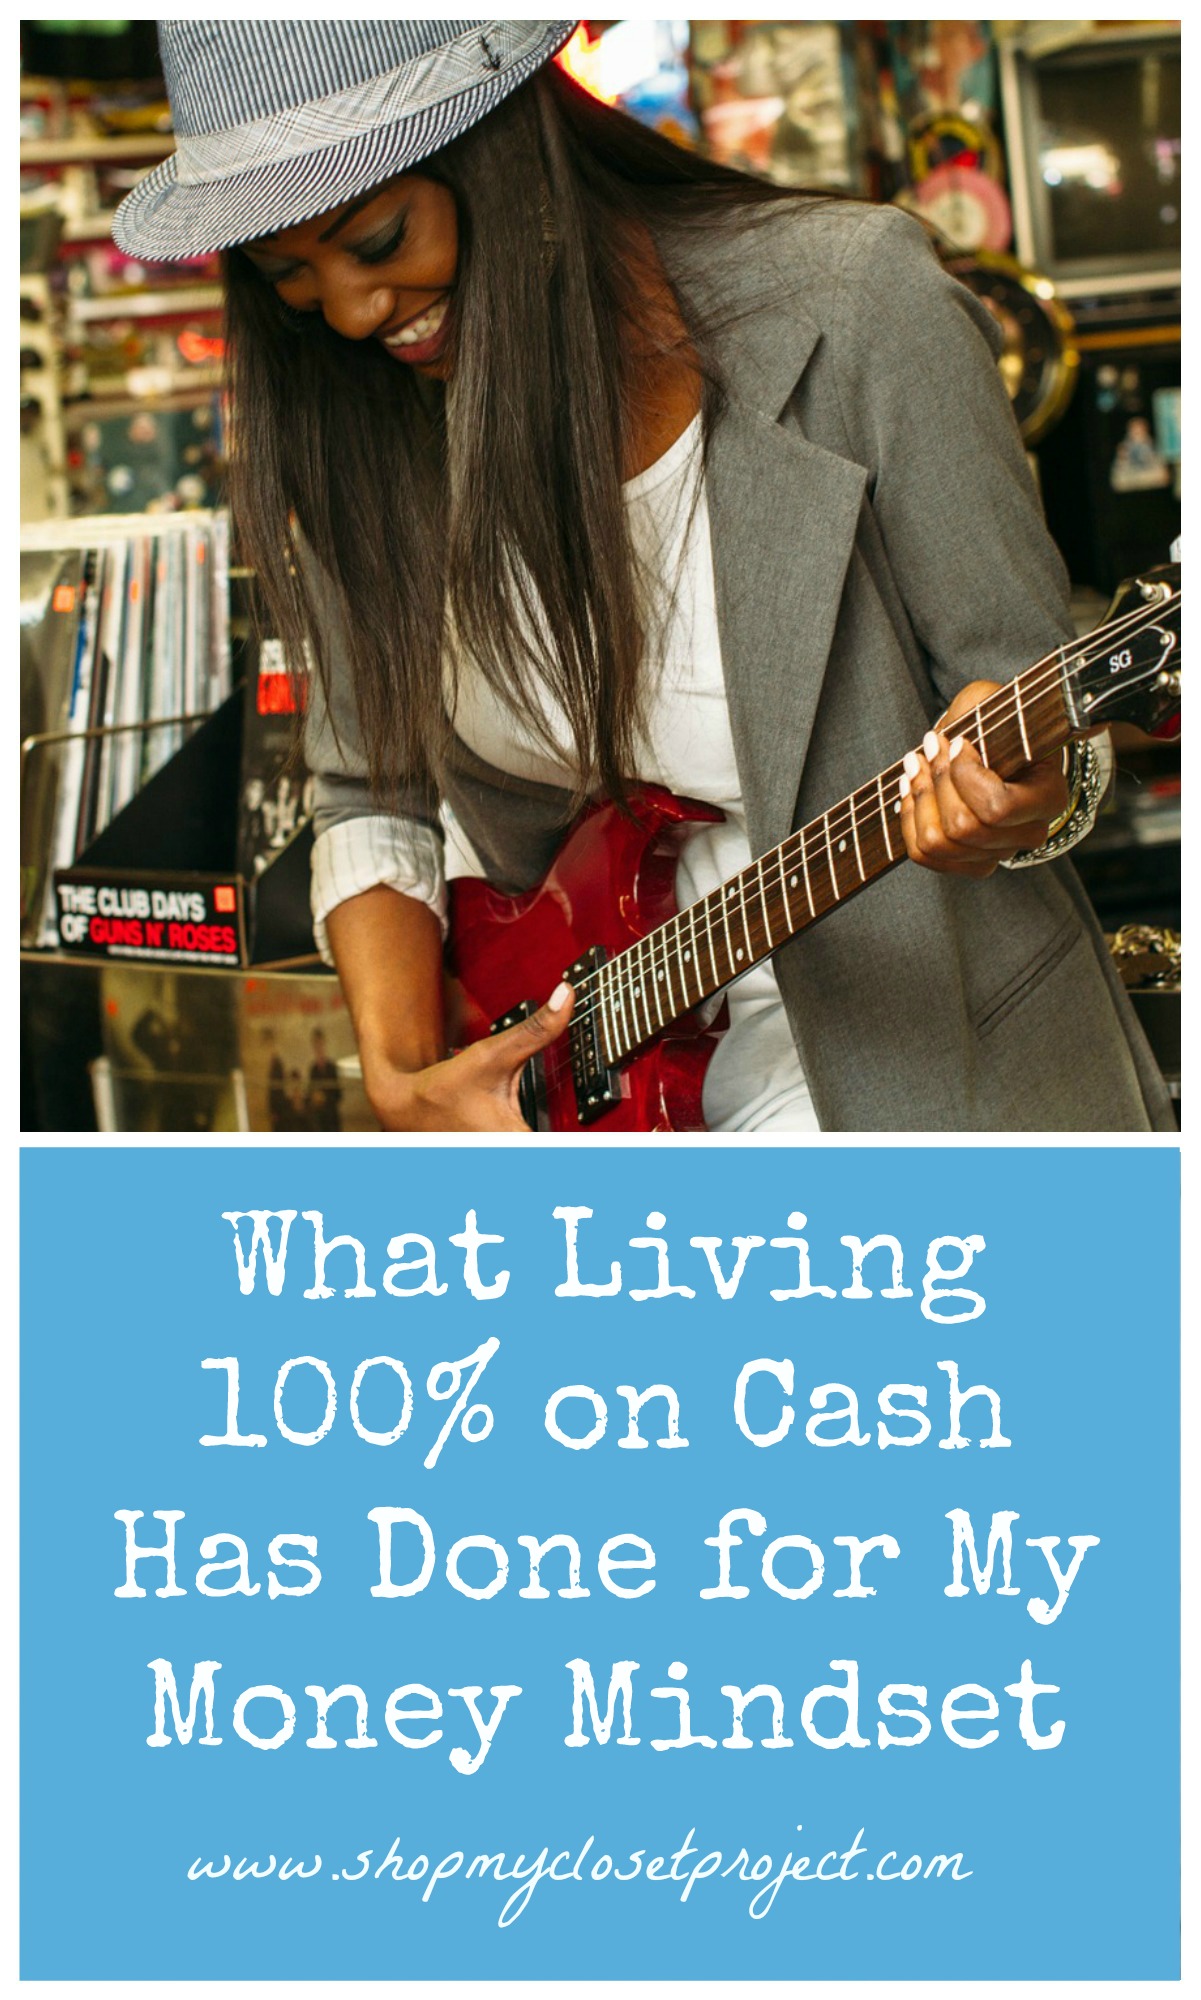 What Living 100% on Cash Has Done for My Money Mindset